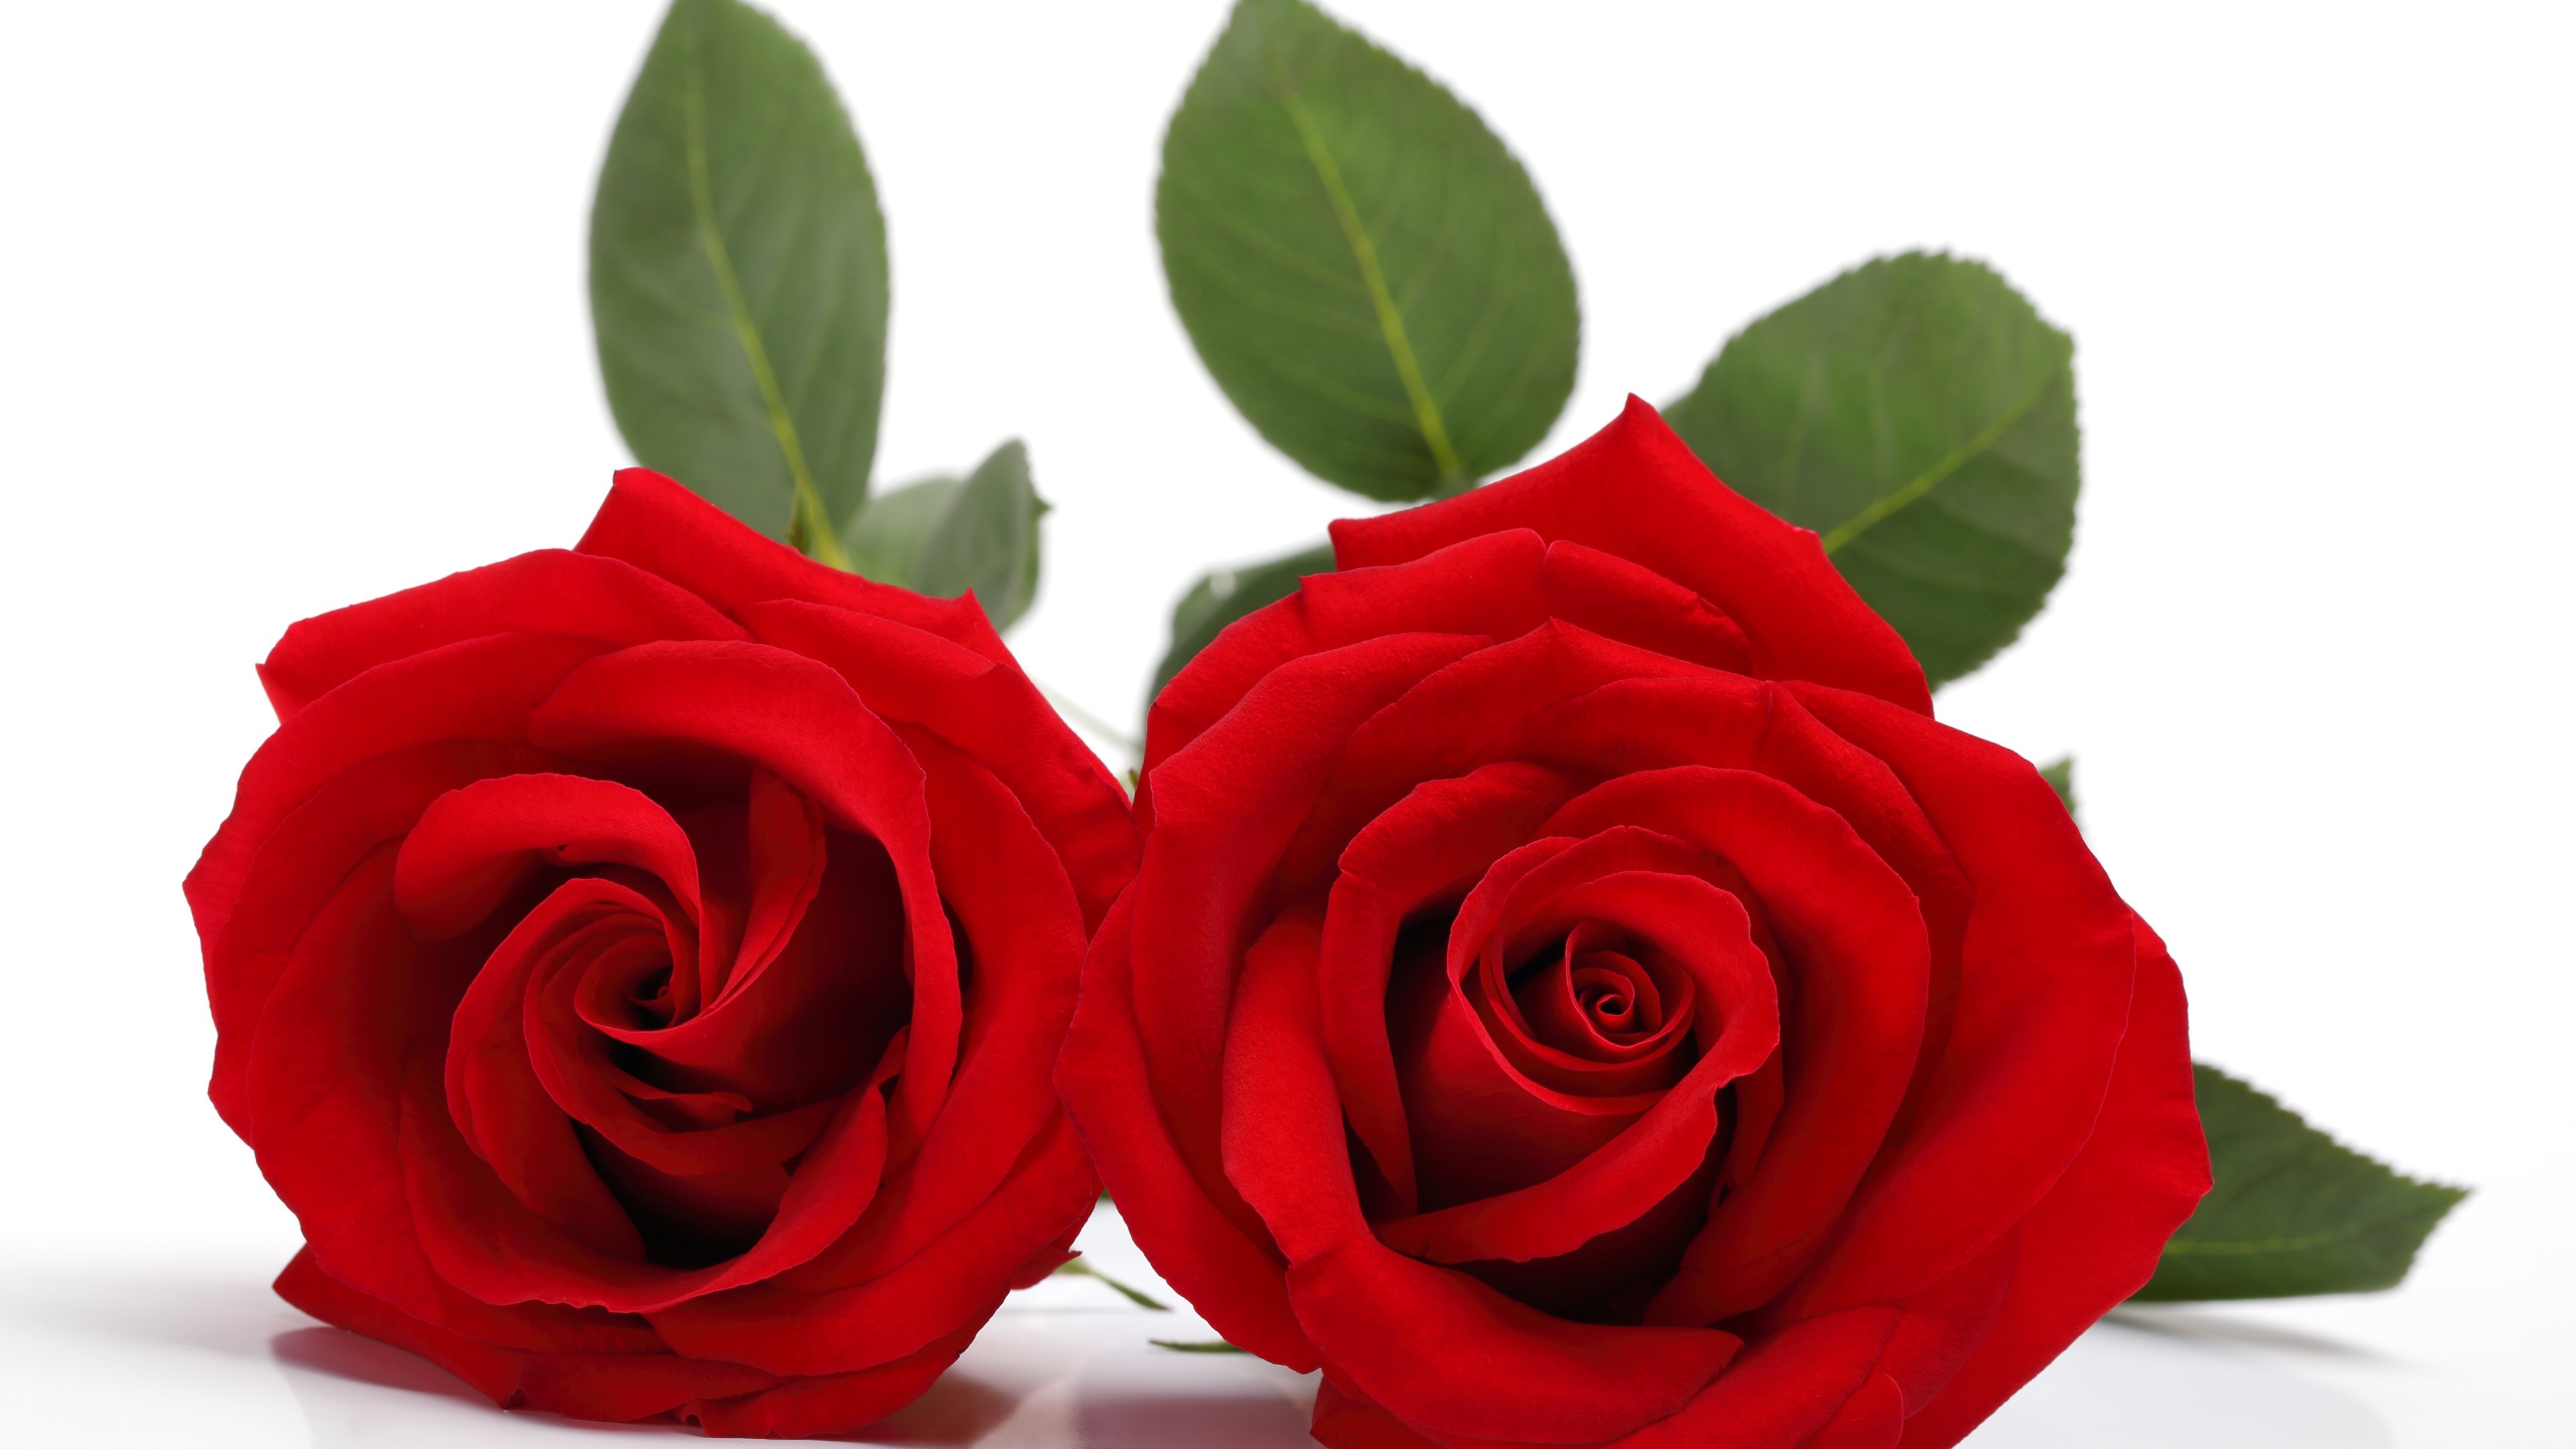 3840x2160 Flowers / Red roses Wallpaper